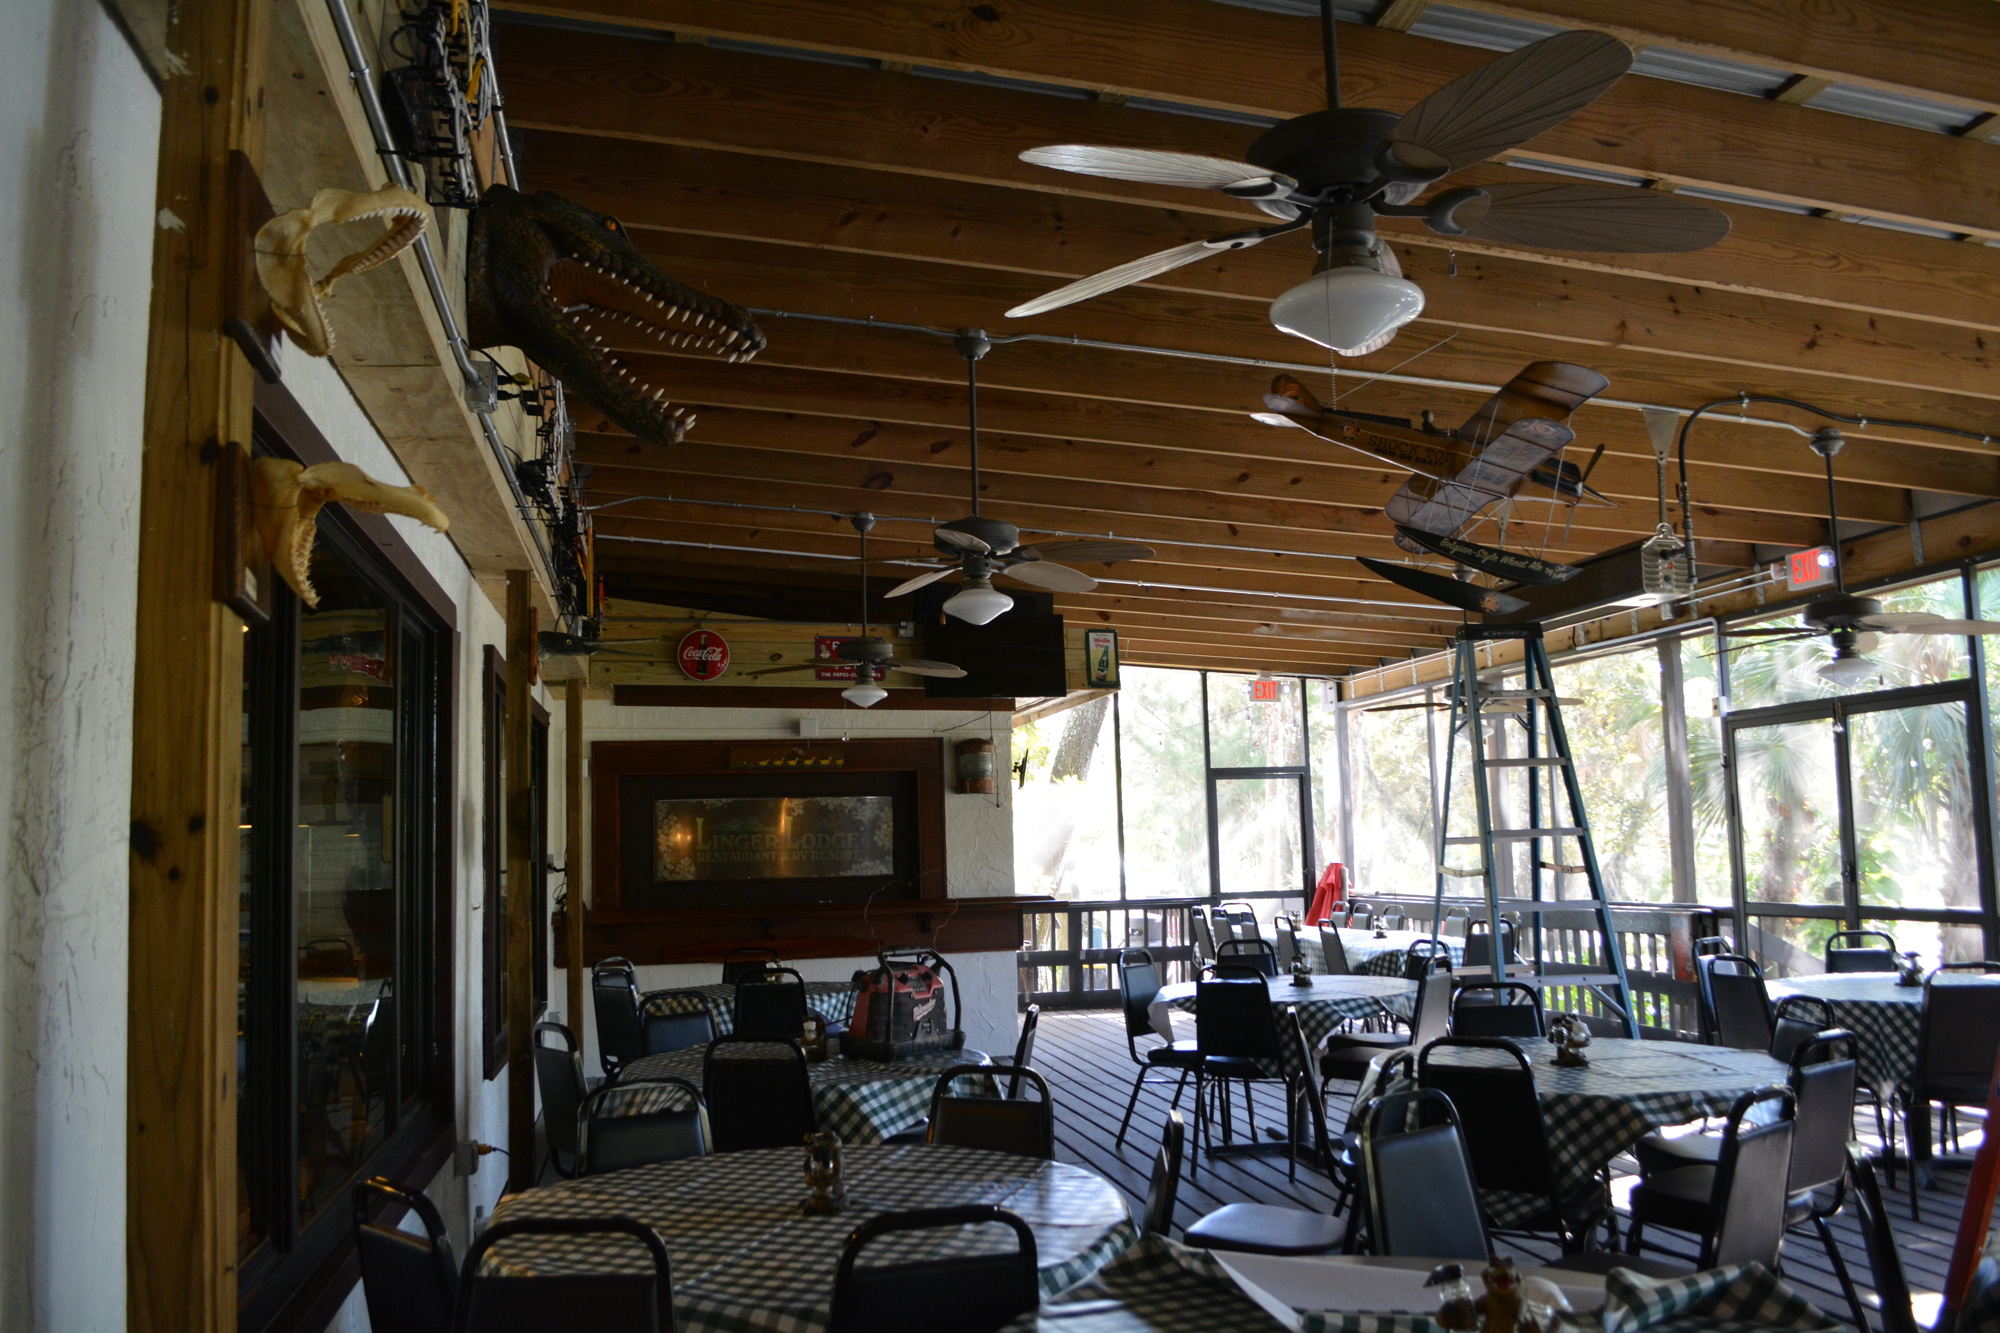 The outdoor patio seats as many people as inside. The new owners plan to add a few tables outside the patio, as well.